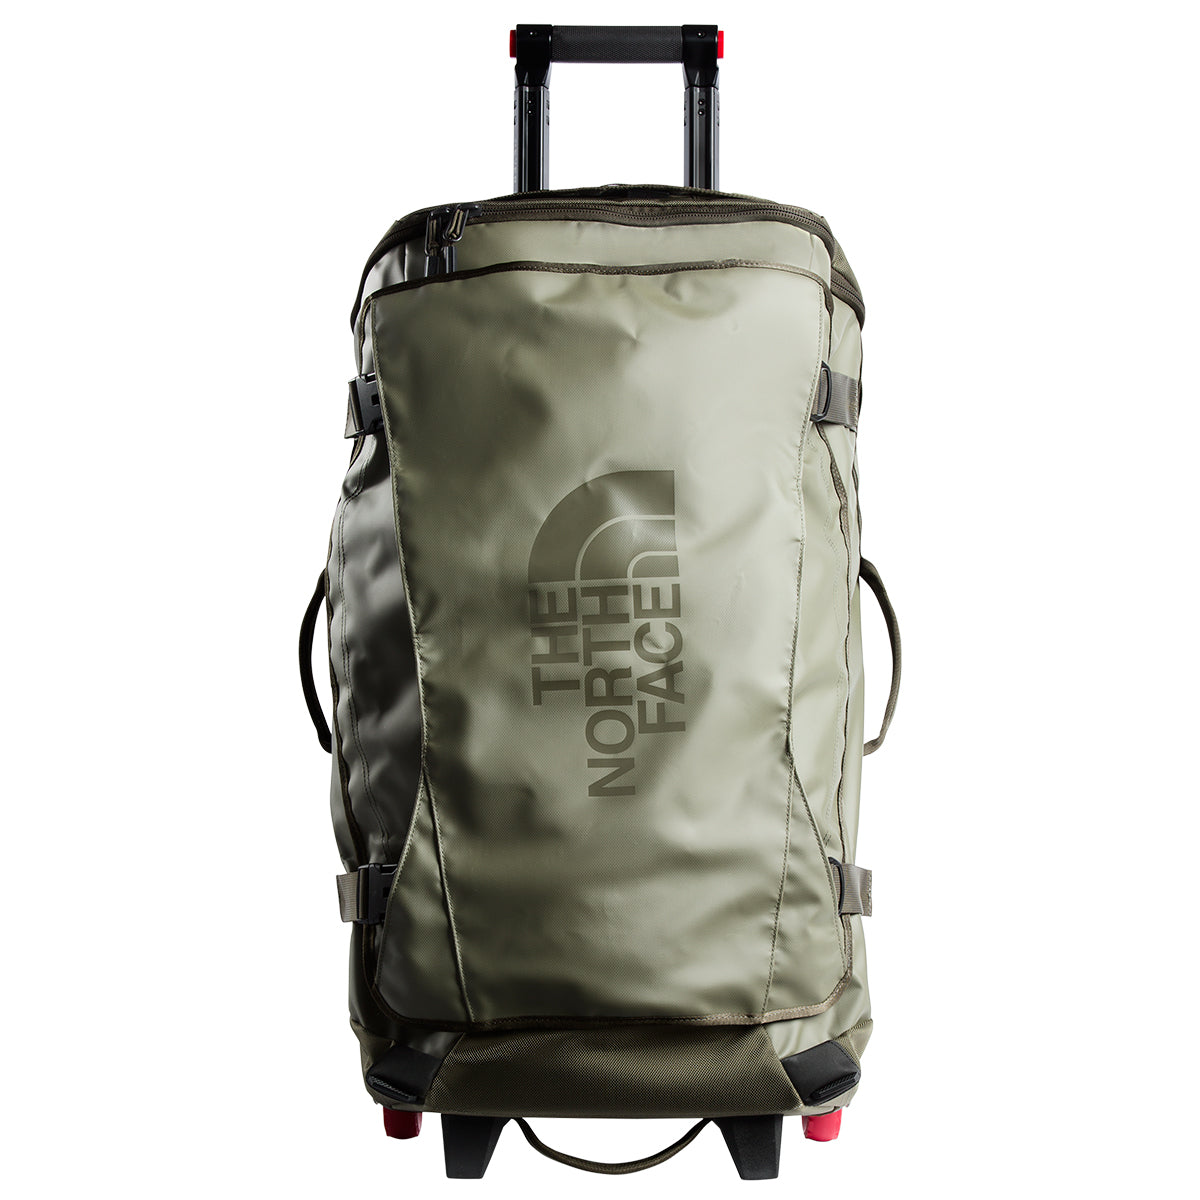 north face luggage rolling thunder 30